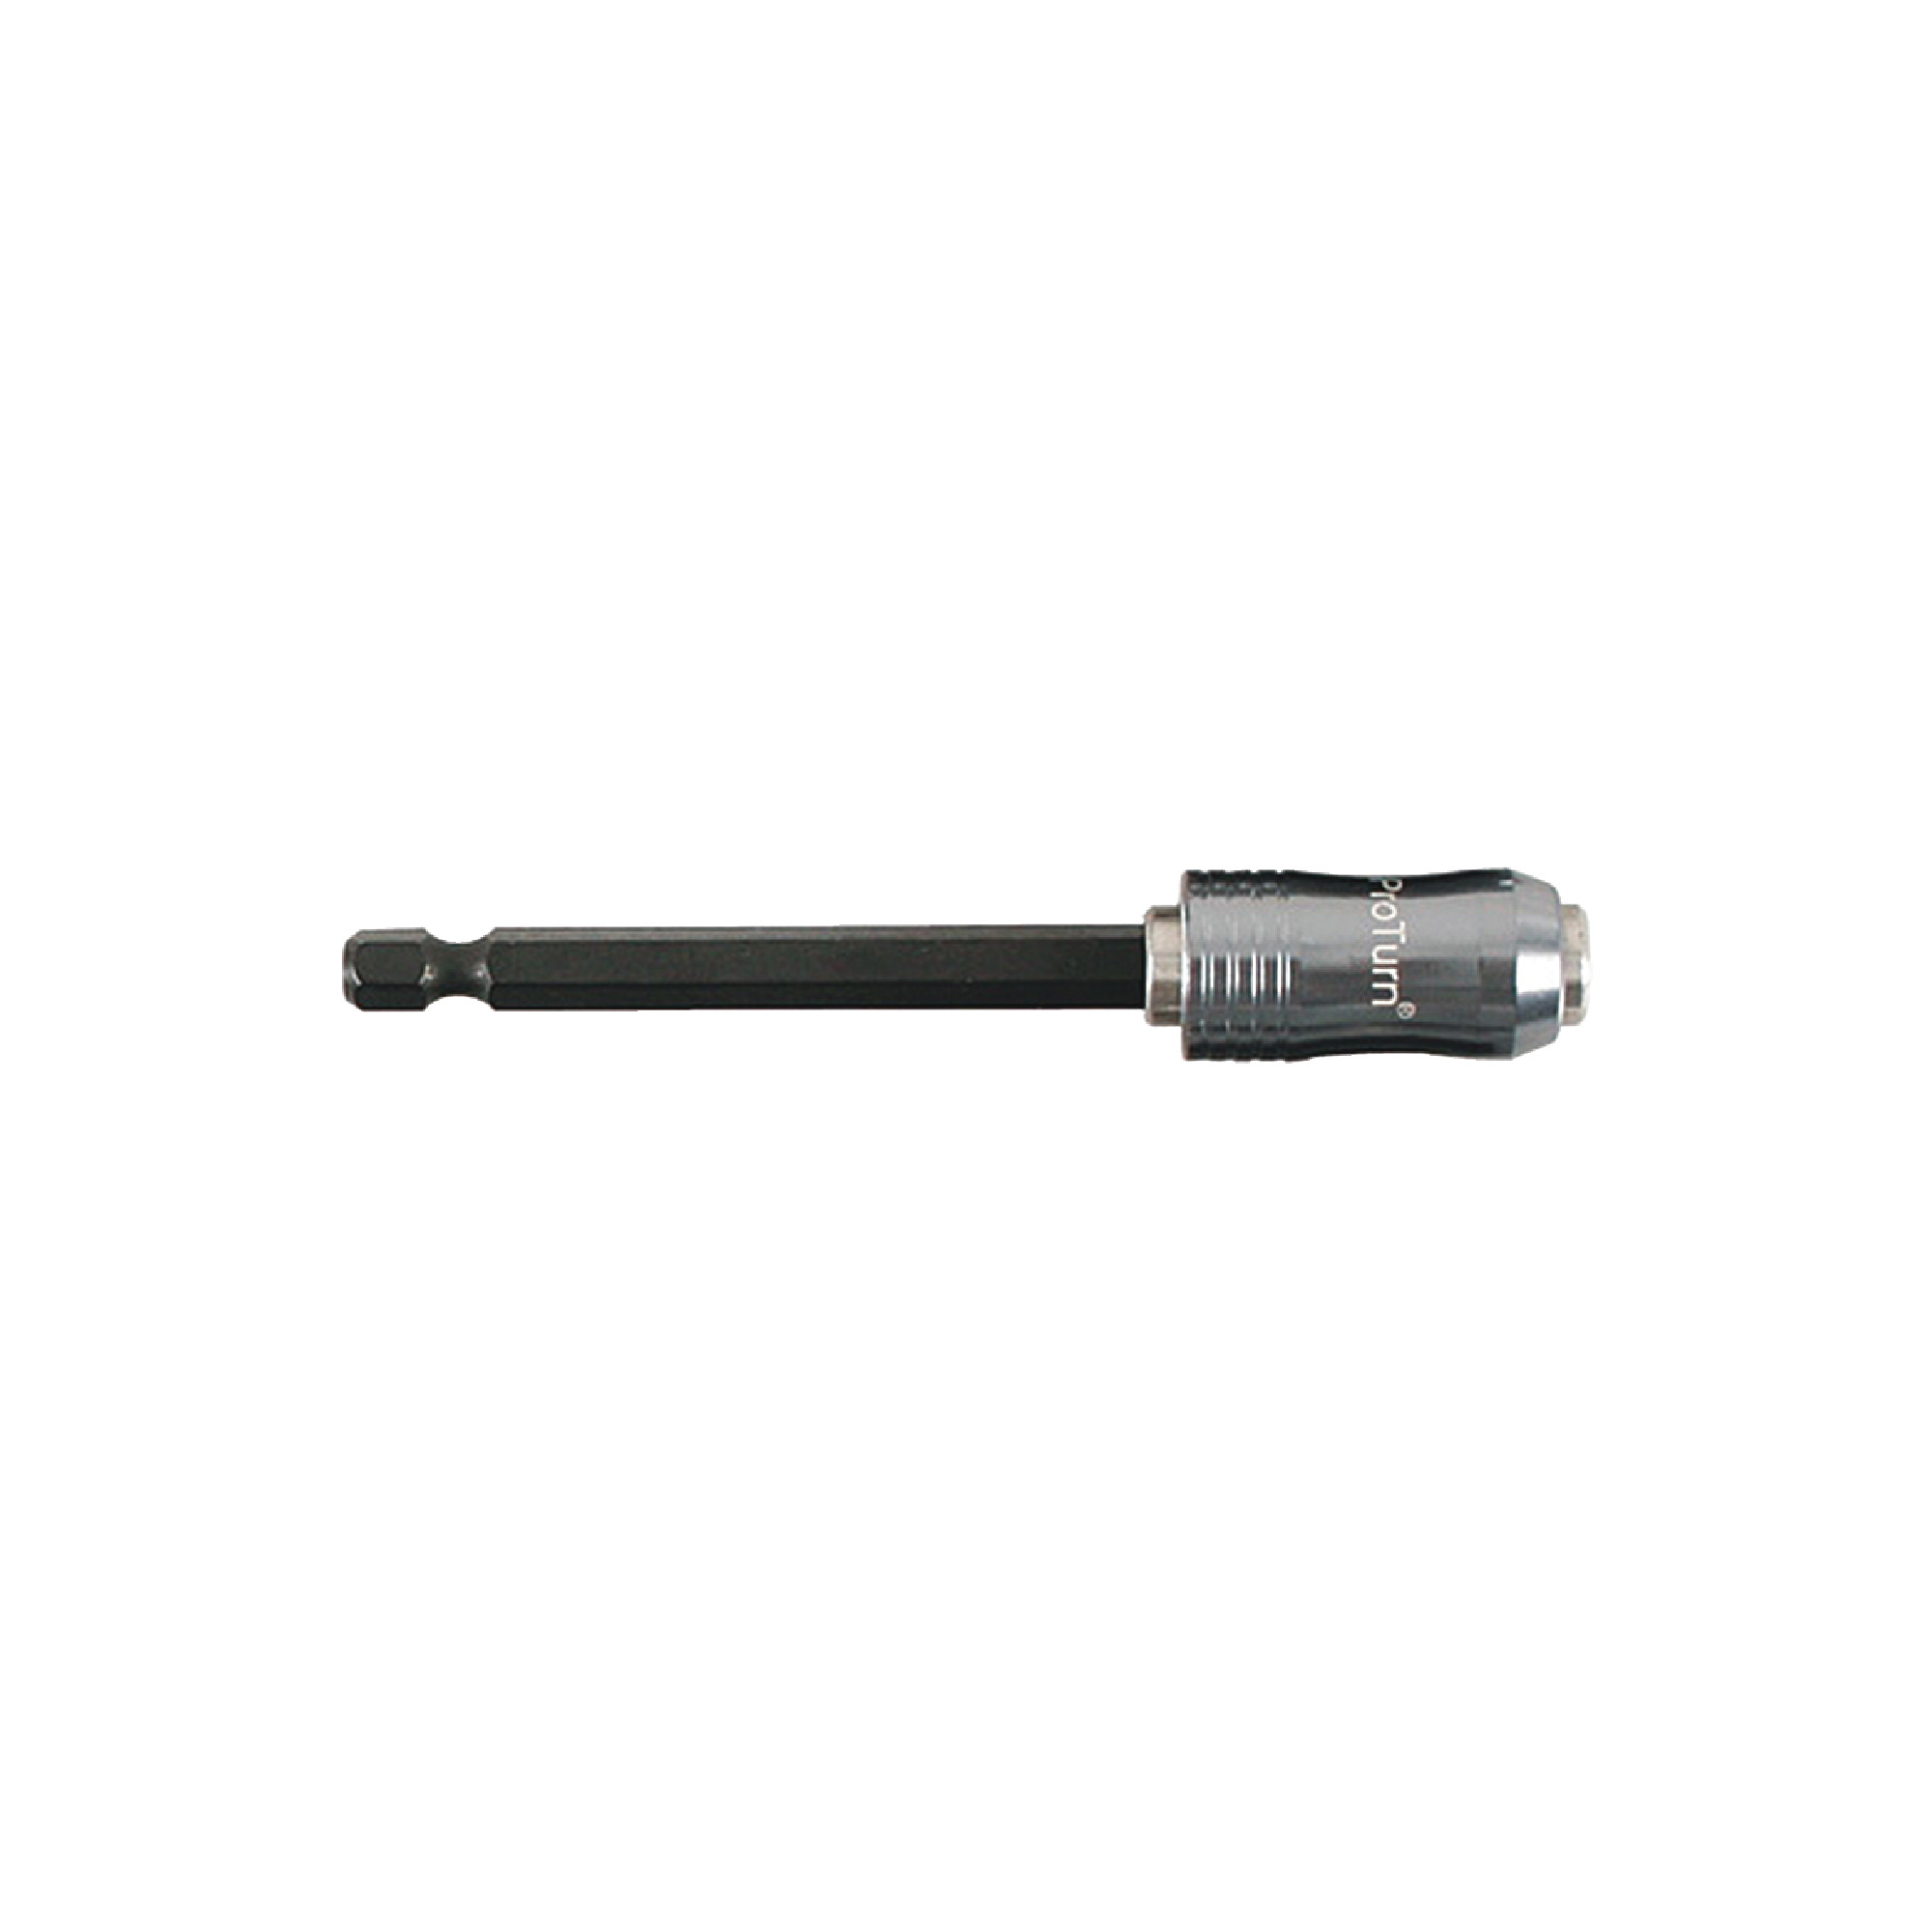 WIHA PRO TURN 1/4" Quick Release Bit Holder with Magnet - 9.8" Overall Length